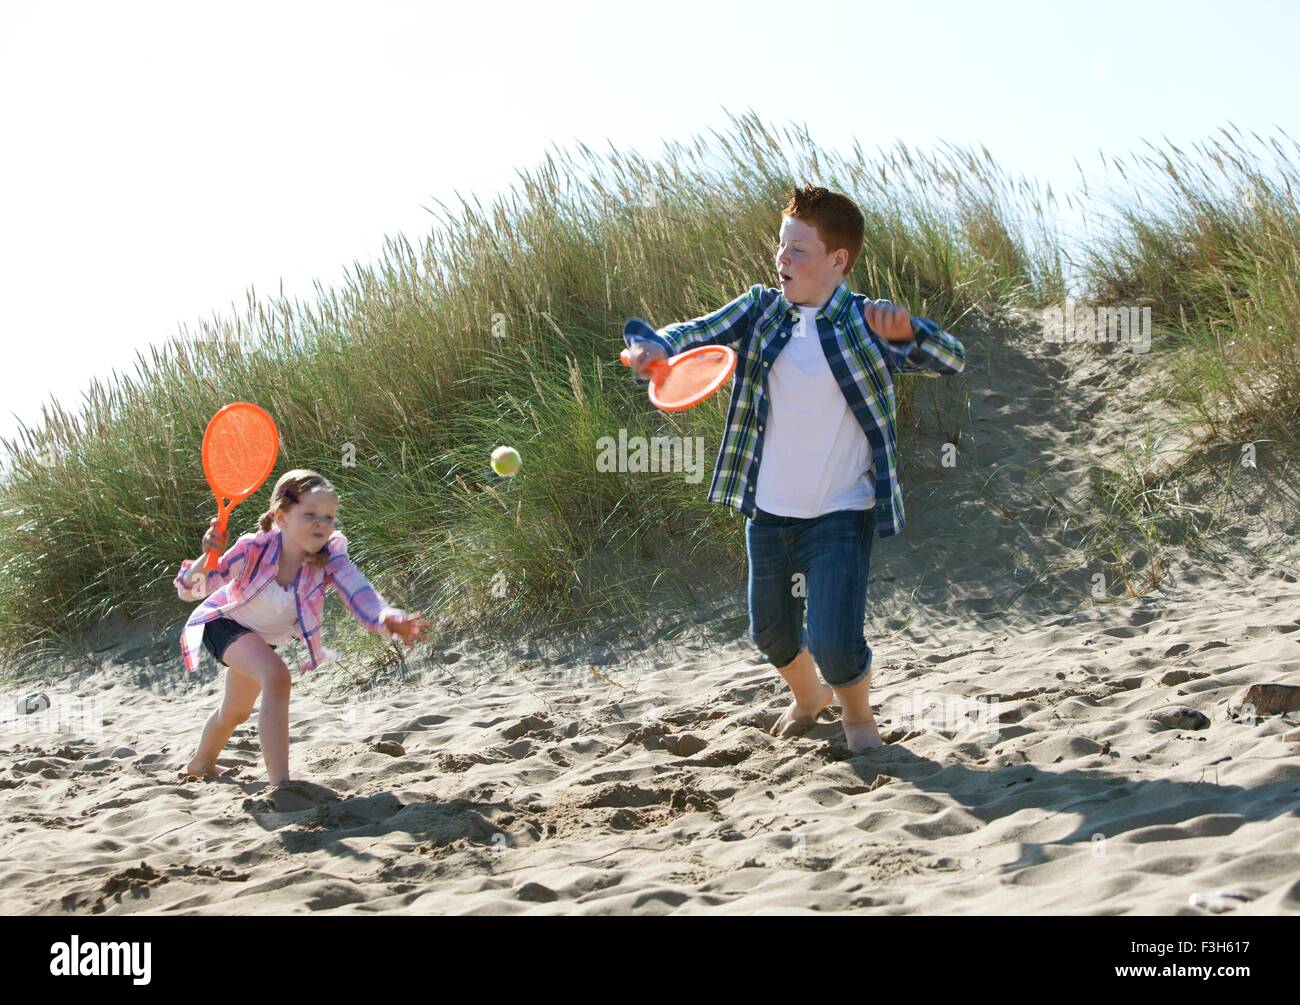 Girl and boy playing with orange sports bat and tennis ball on dunes Stock Photo